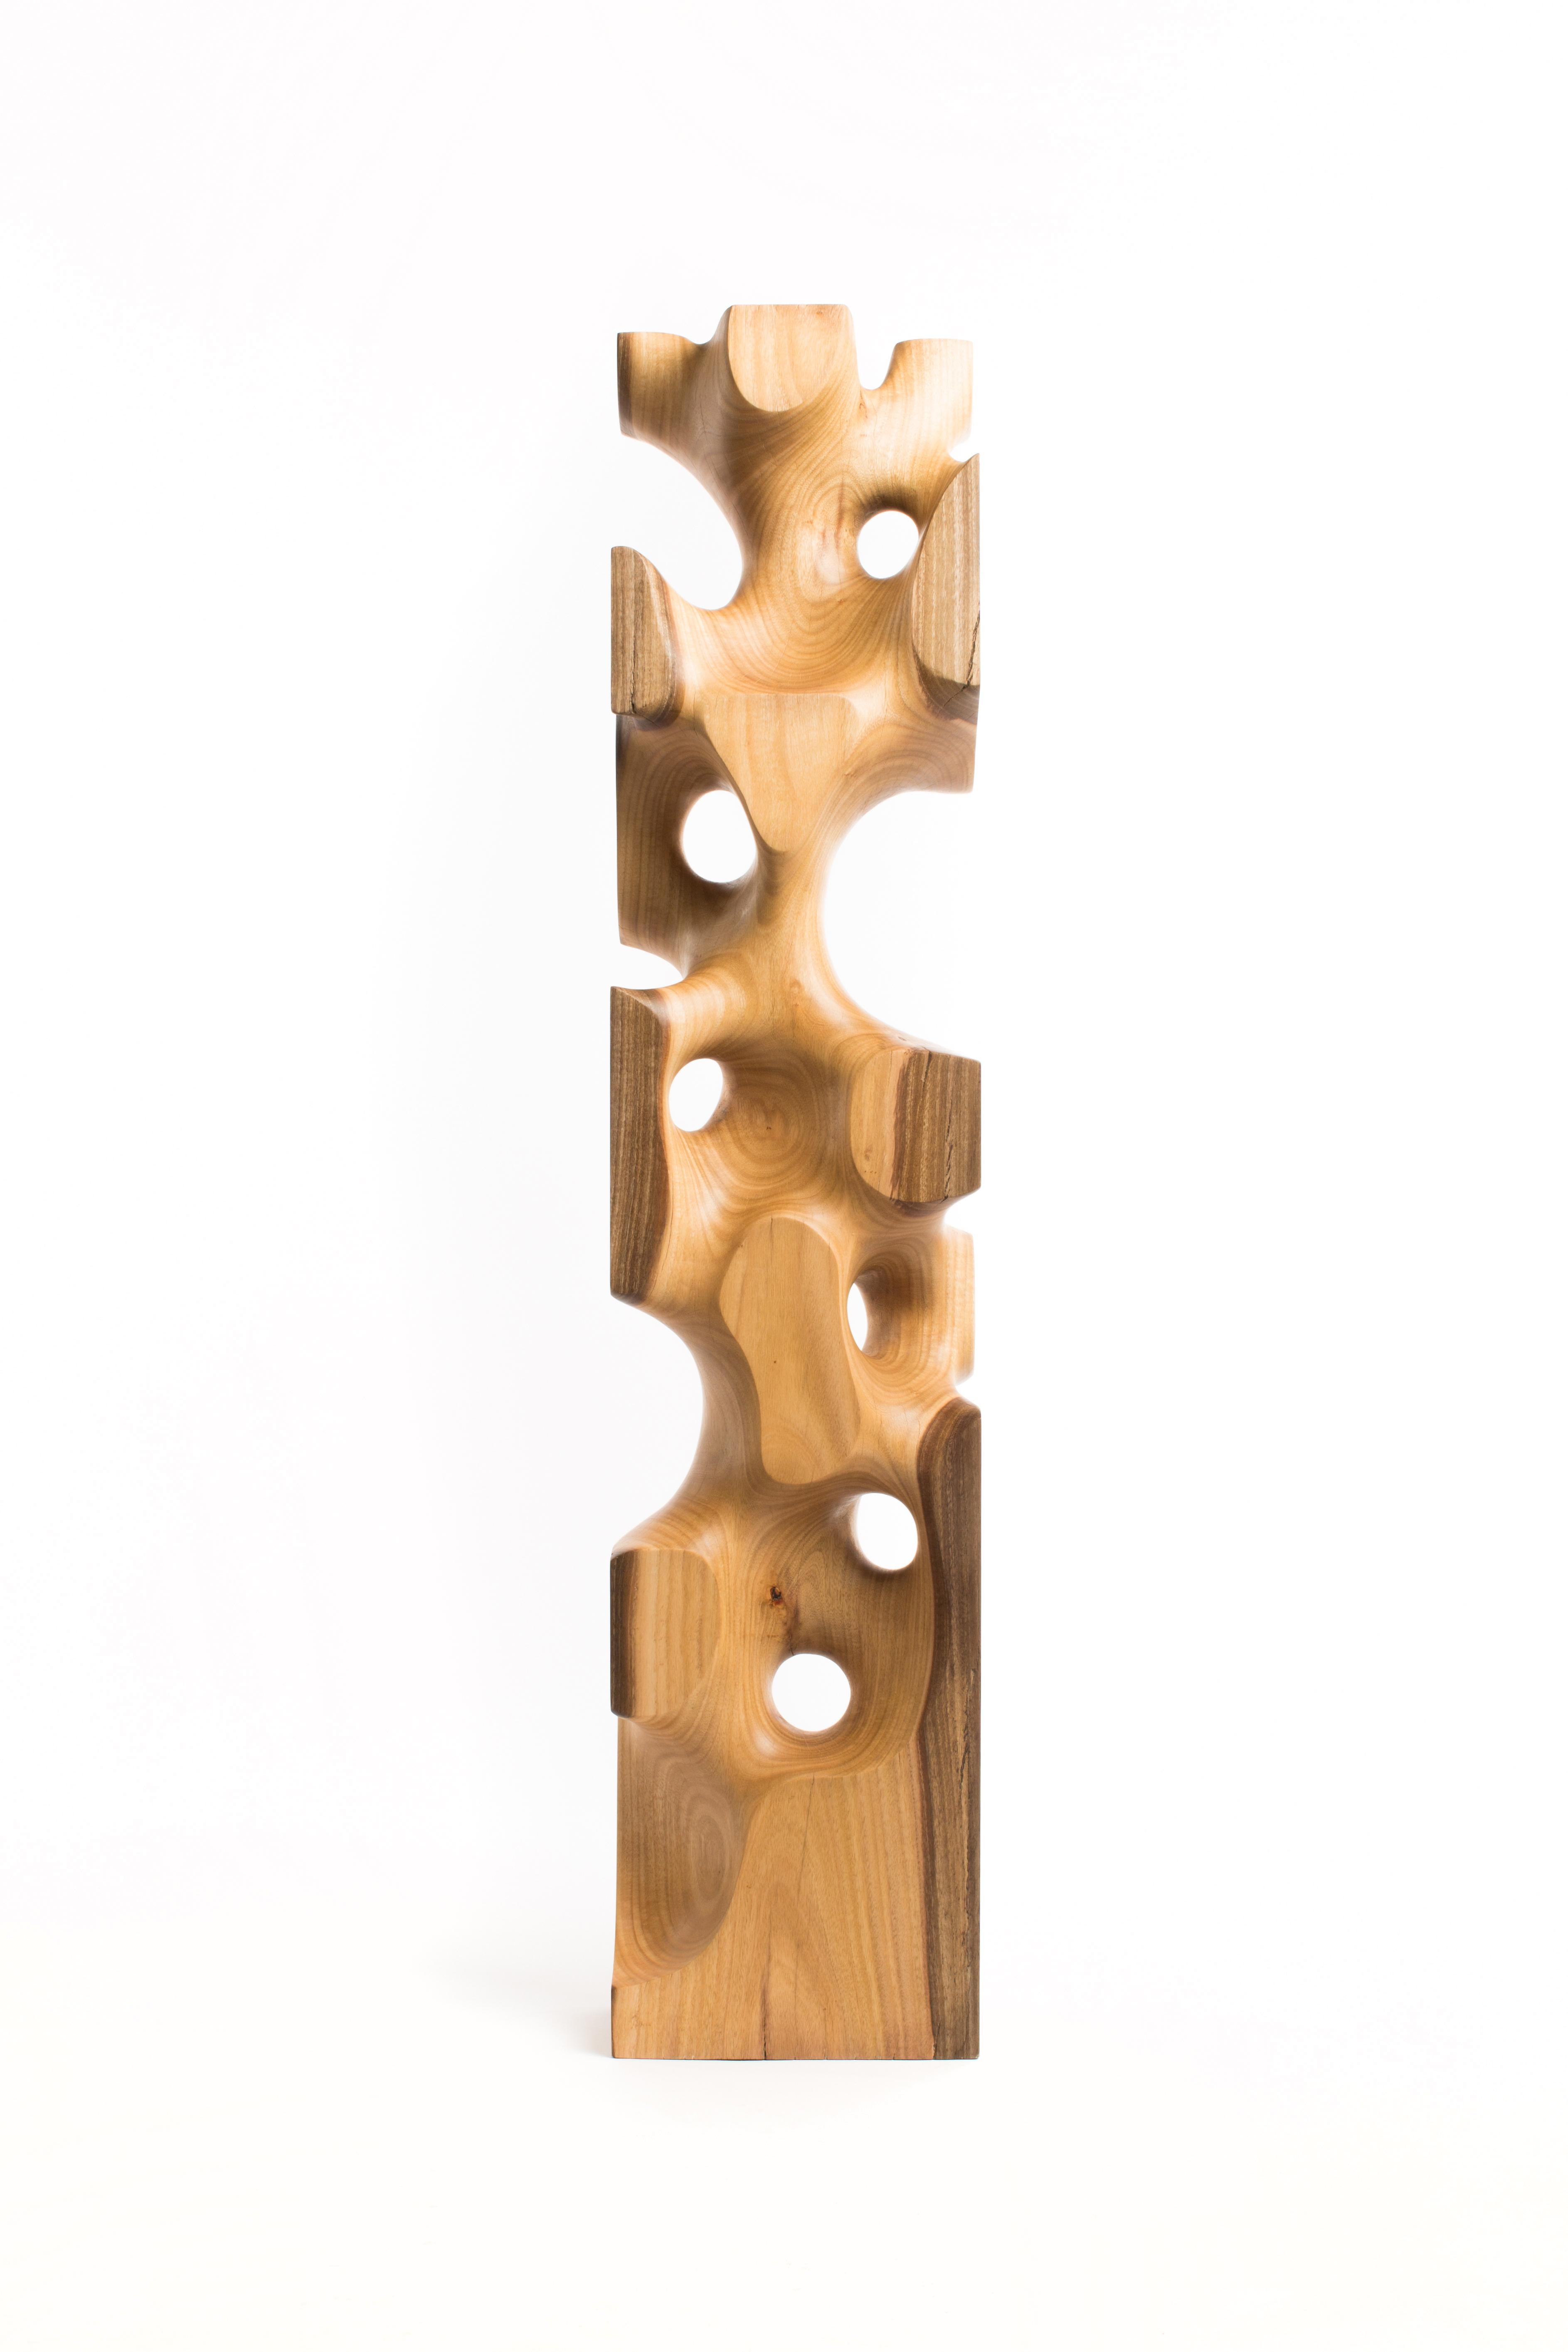 Wooden Cuboid 009
1/1
Flowering Gum
17.5cm x 29cm x 134.5 cm 
36.2Kg
2020

Crystalized Sculptures is an abstracted exploration of marks left on the physical mind by experiences of emotion and feelings. In Driaan Claassens' work, where whisps portray